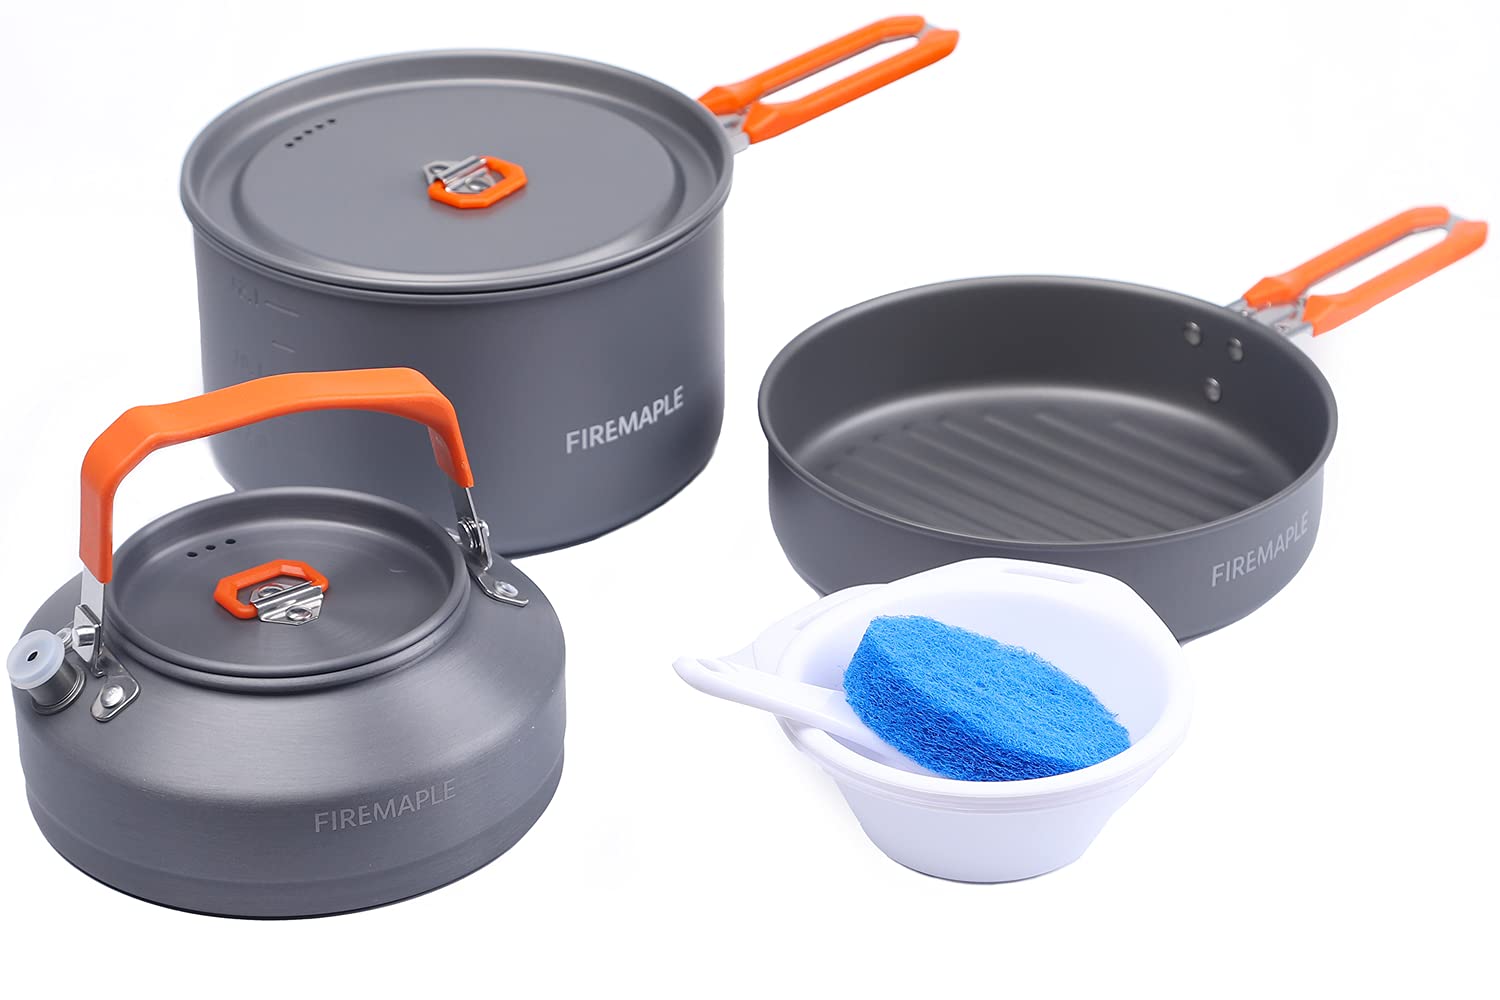 Fire-Maple Feast 2 Camping Cookware Set | Outdoor Cooking kit with Pot Kettle Pan Bowls and Spatula | Kitchen Utensils for 1 to 3 People Backpacking Trekking Hiking Fishing Picnic